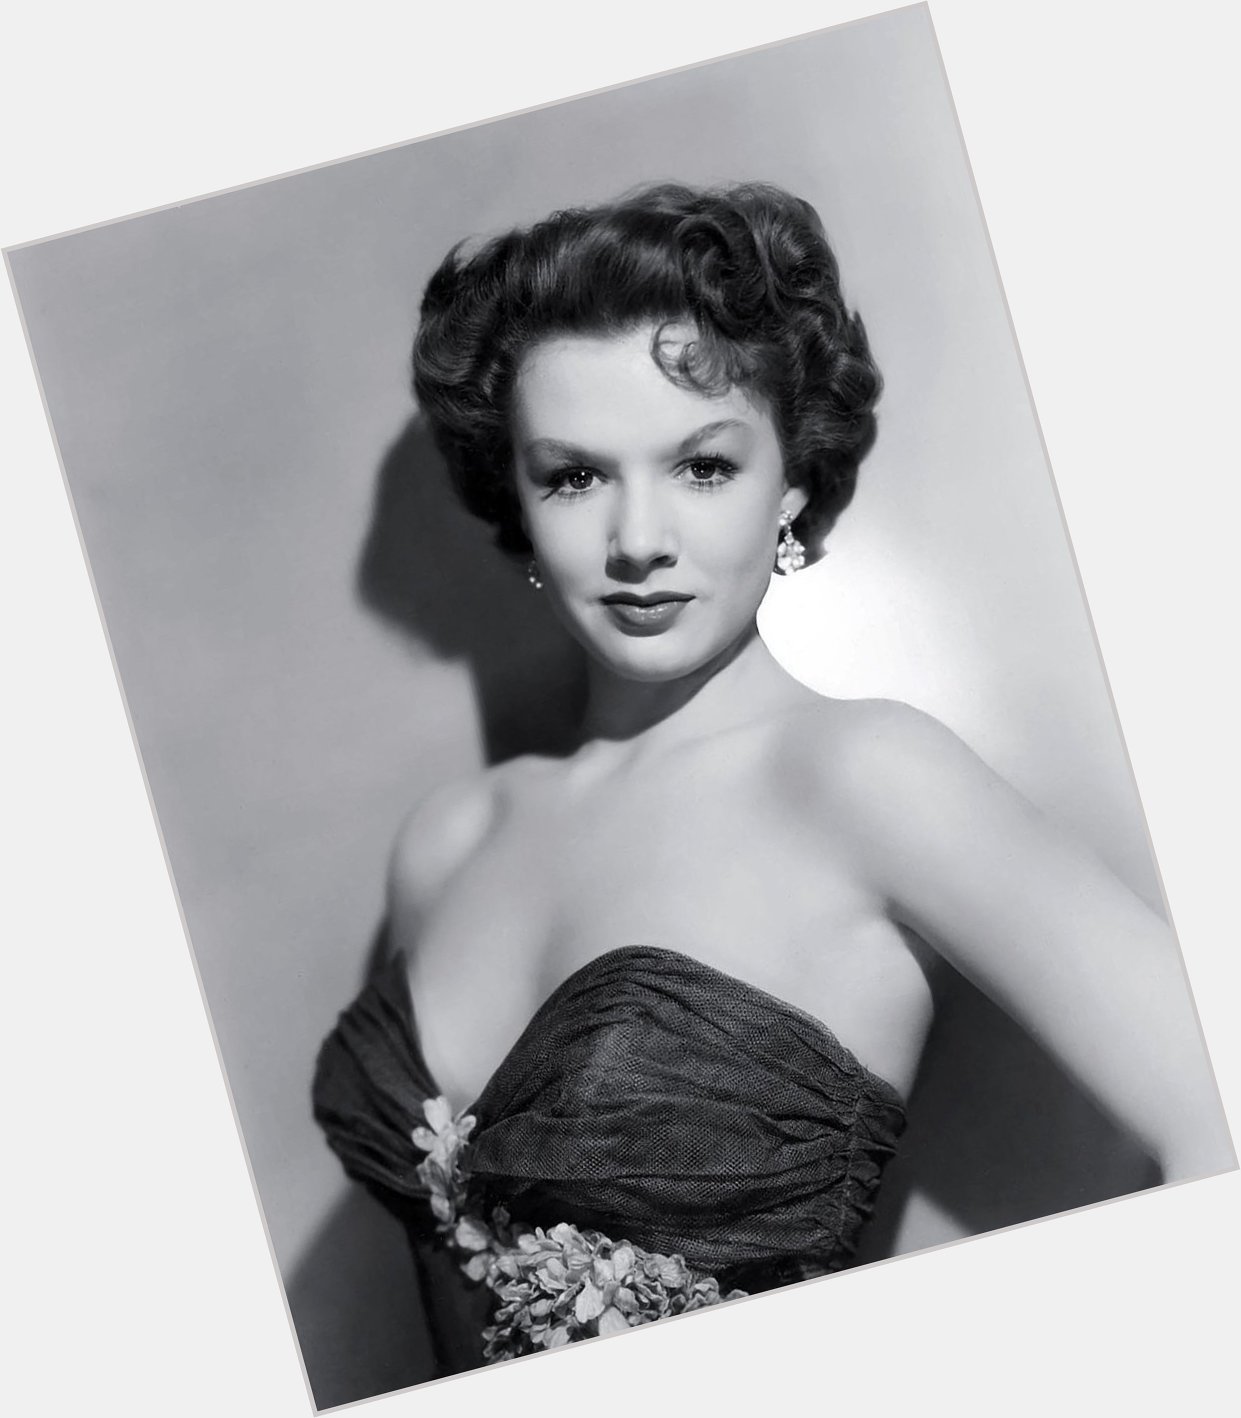 Happy Birthday to Piper Laurie, who turns 86 today! 